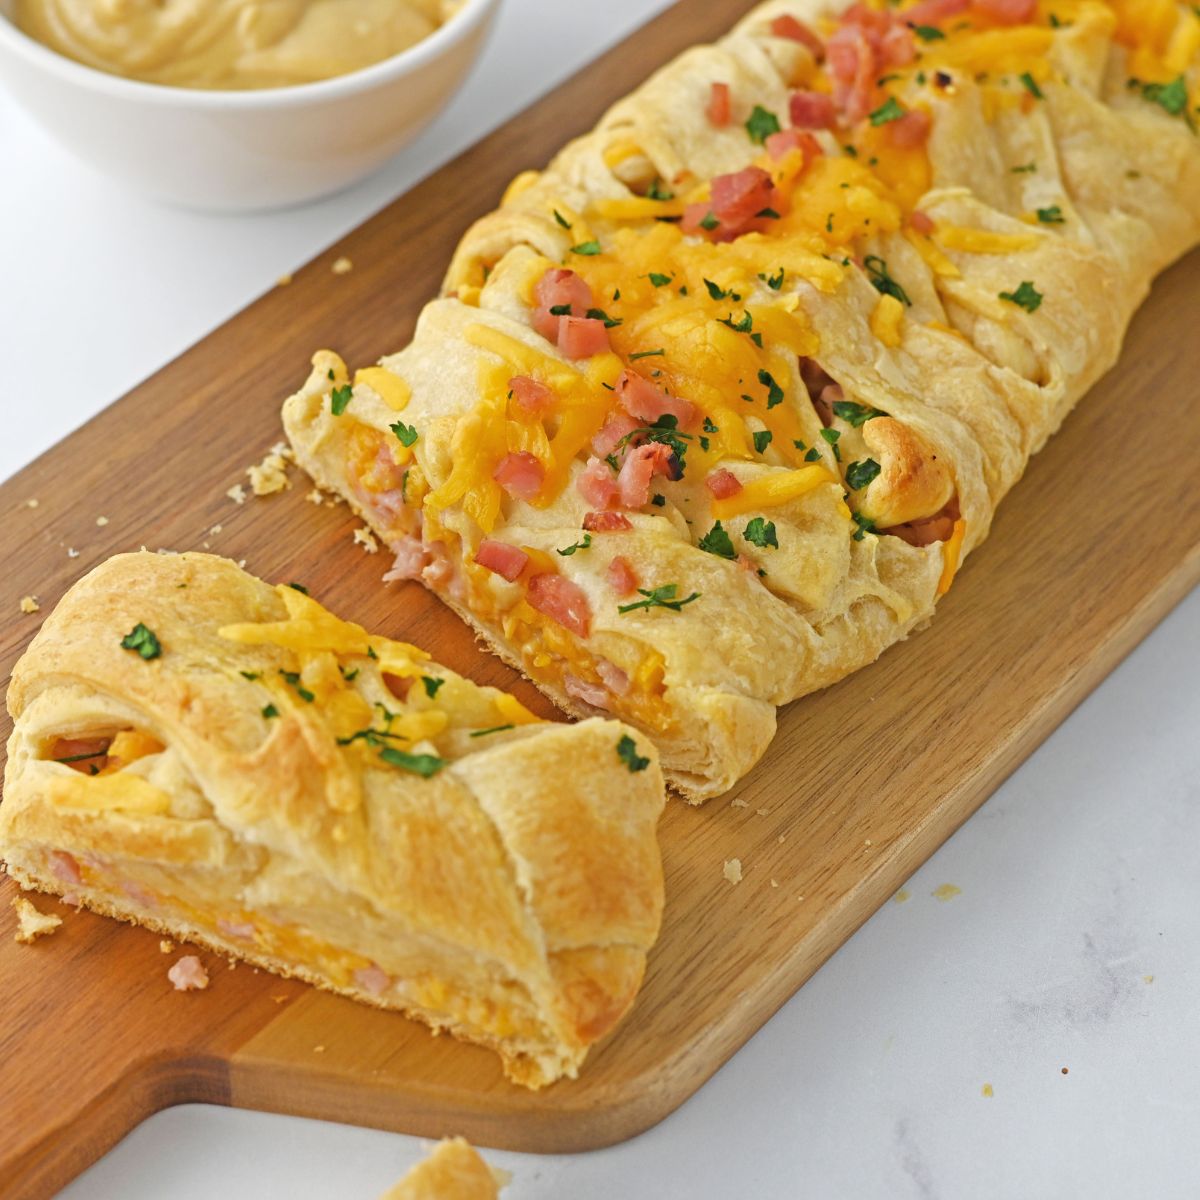 A ham and cheese crescent roll on a cutting board.